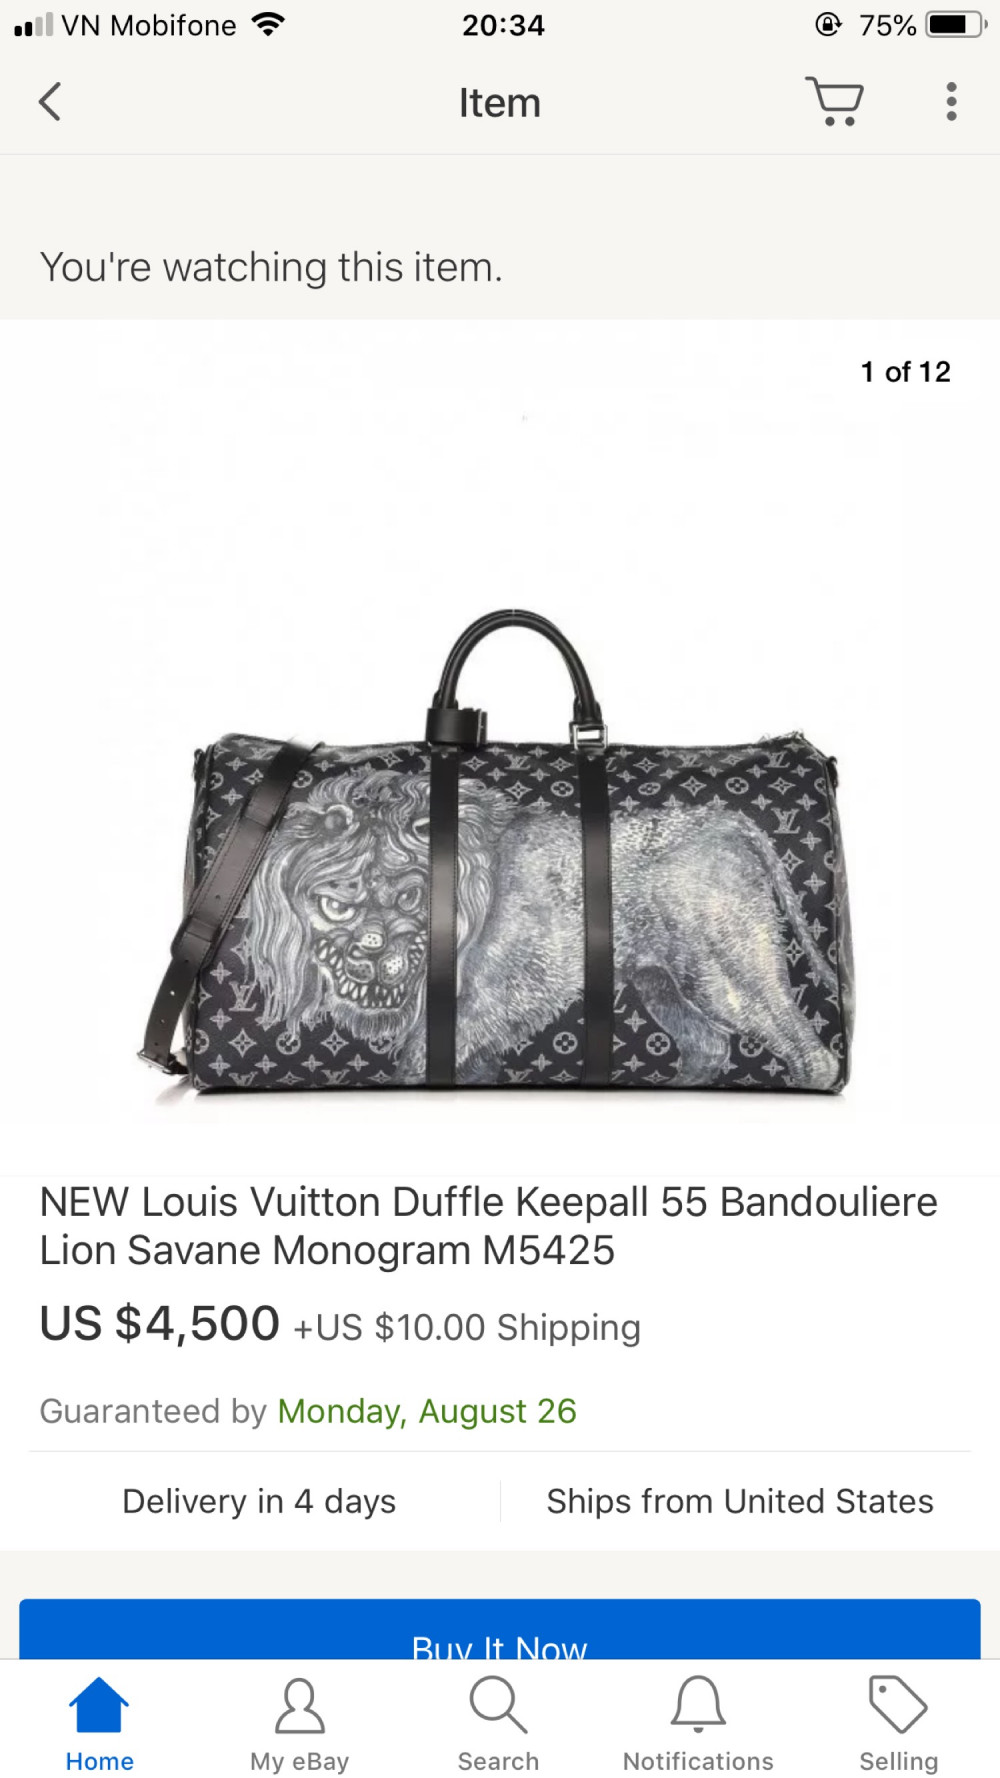 Louis Vuitton Onyx Damier Infini Keepall Bandouliere 55  LV for Less